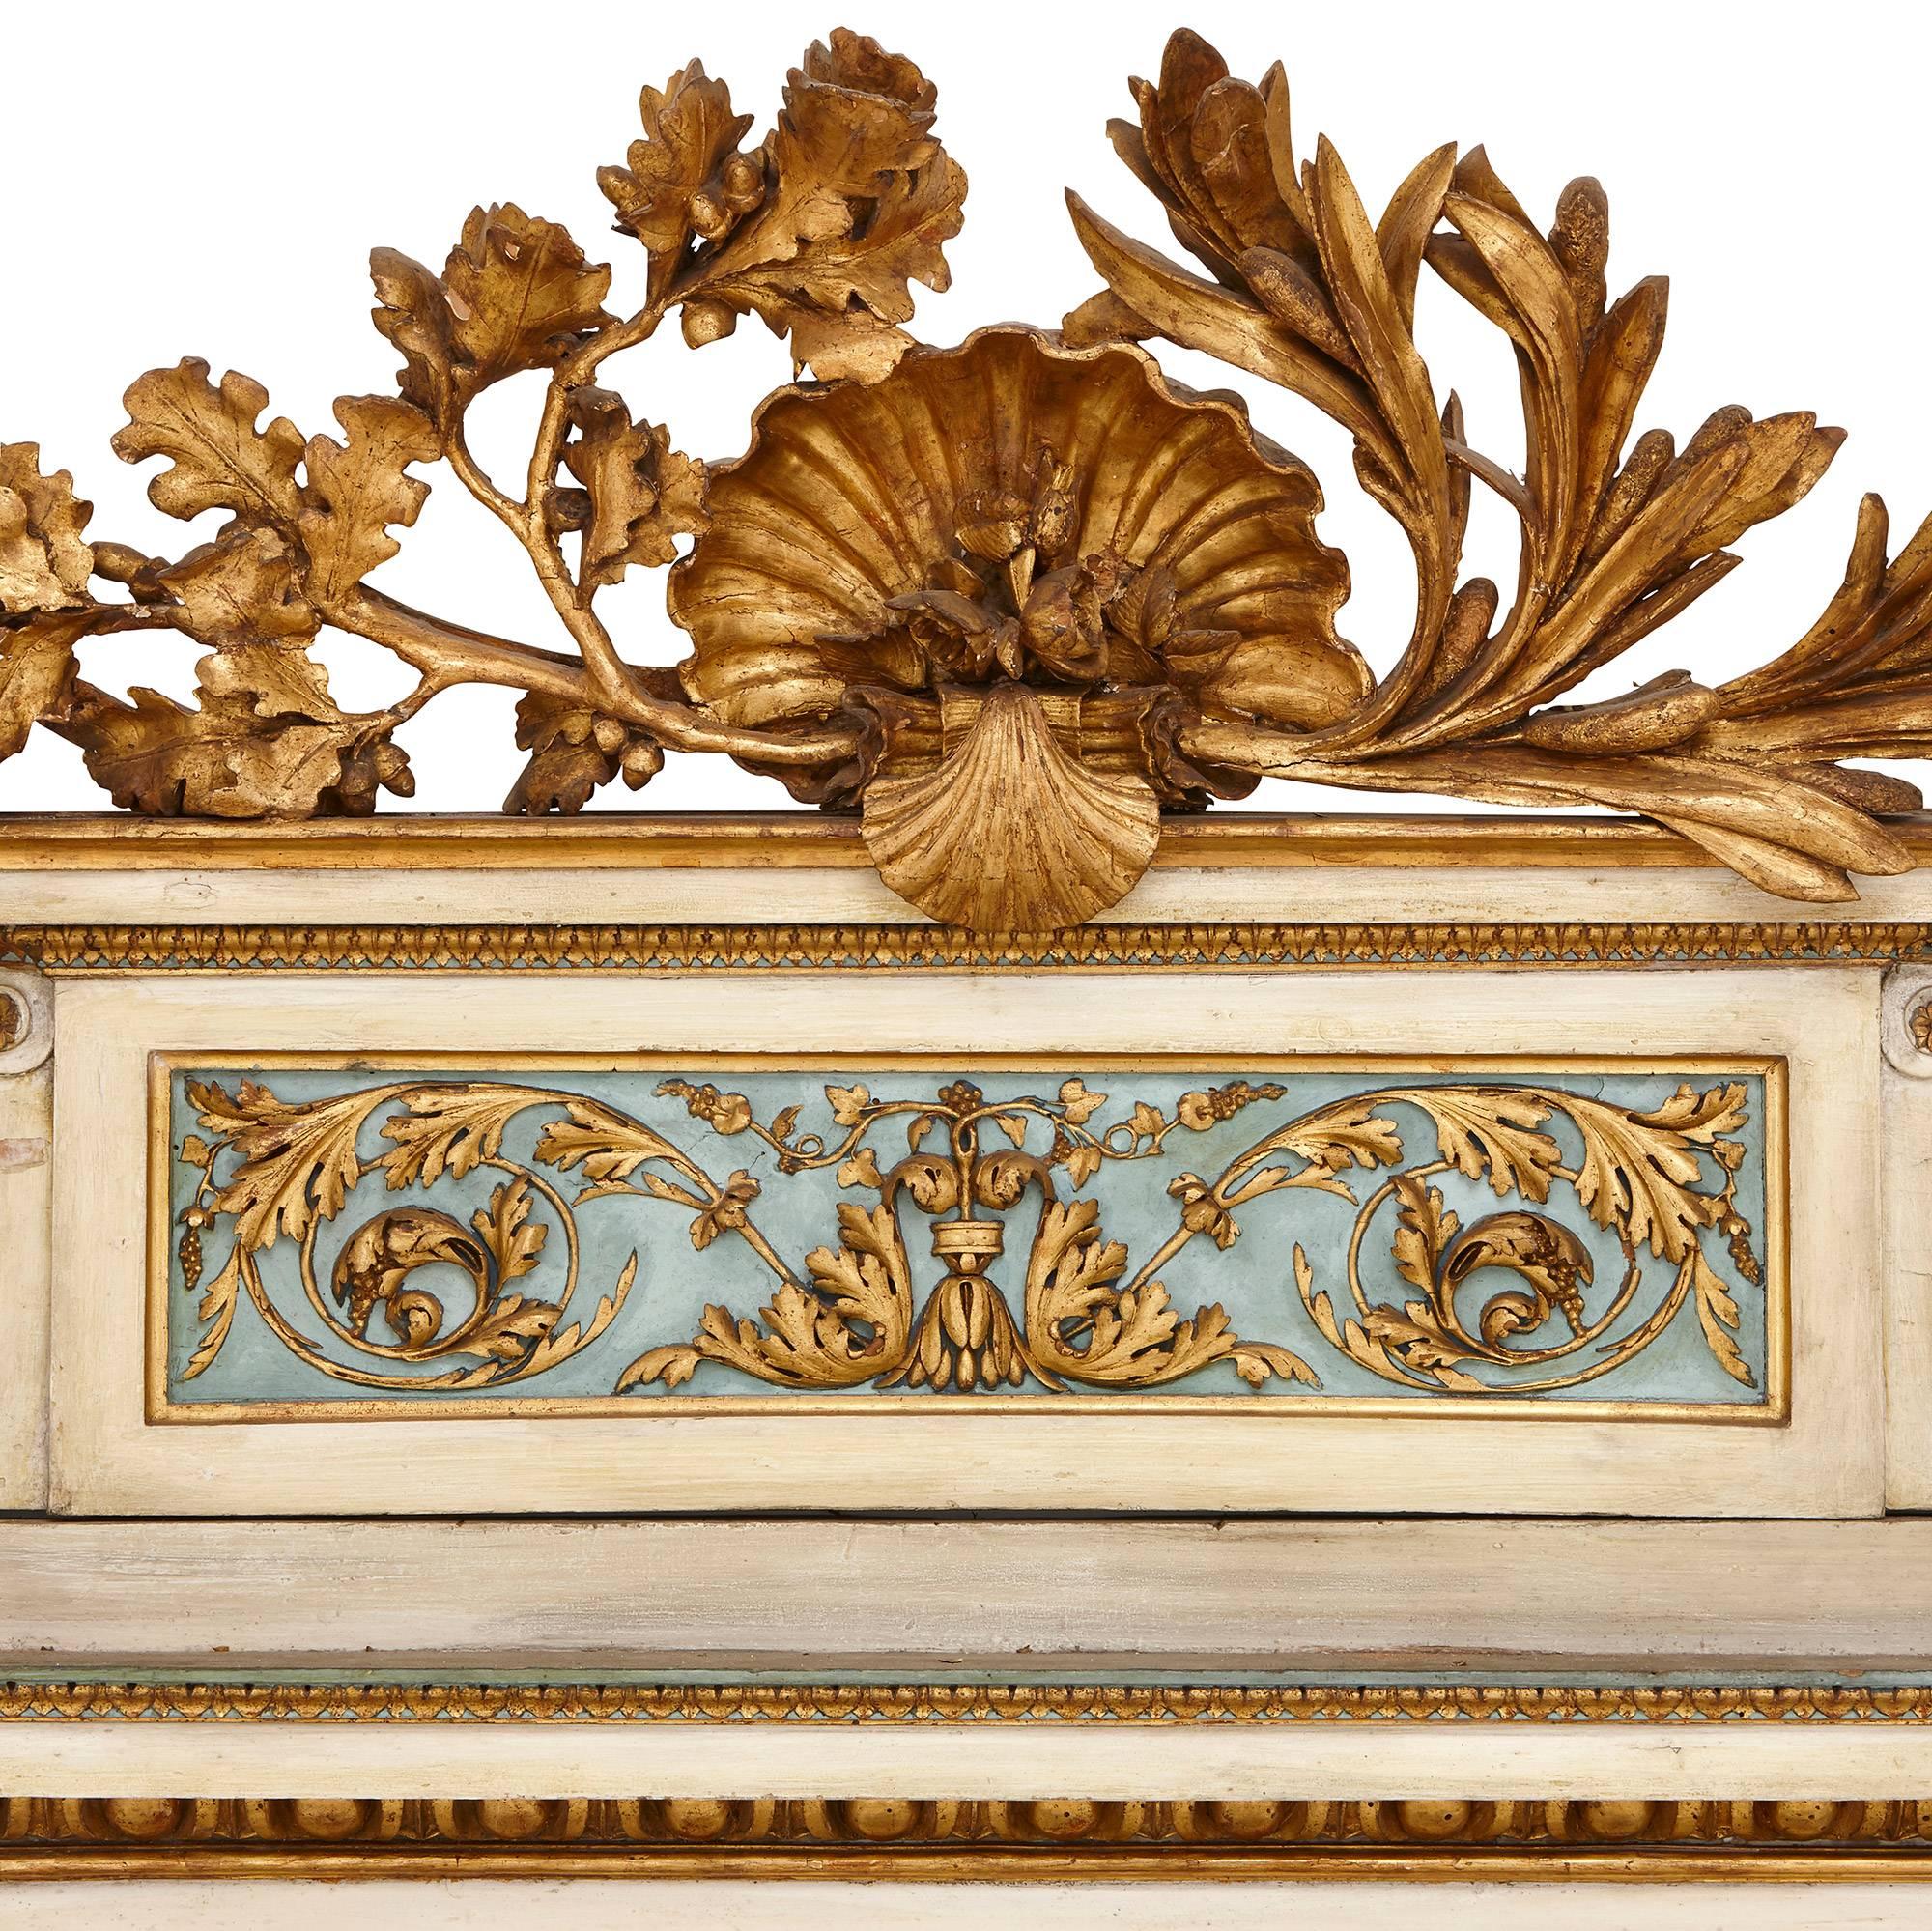 The pair of 18th century mirrored console tables are crafted in painted and gilded wood in a harmonious pastel color scheme of cream, blue and gold. 

The consoles are of rectangular form and are each set on four square, fluted, tapered legs,